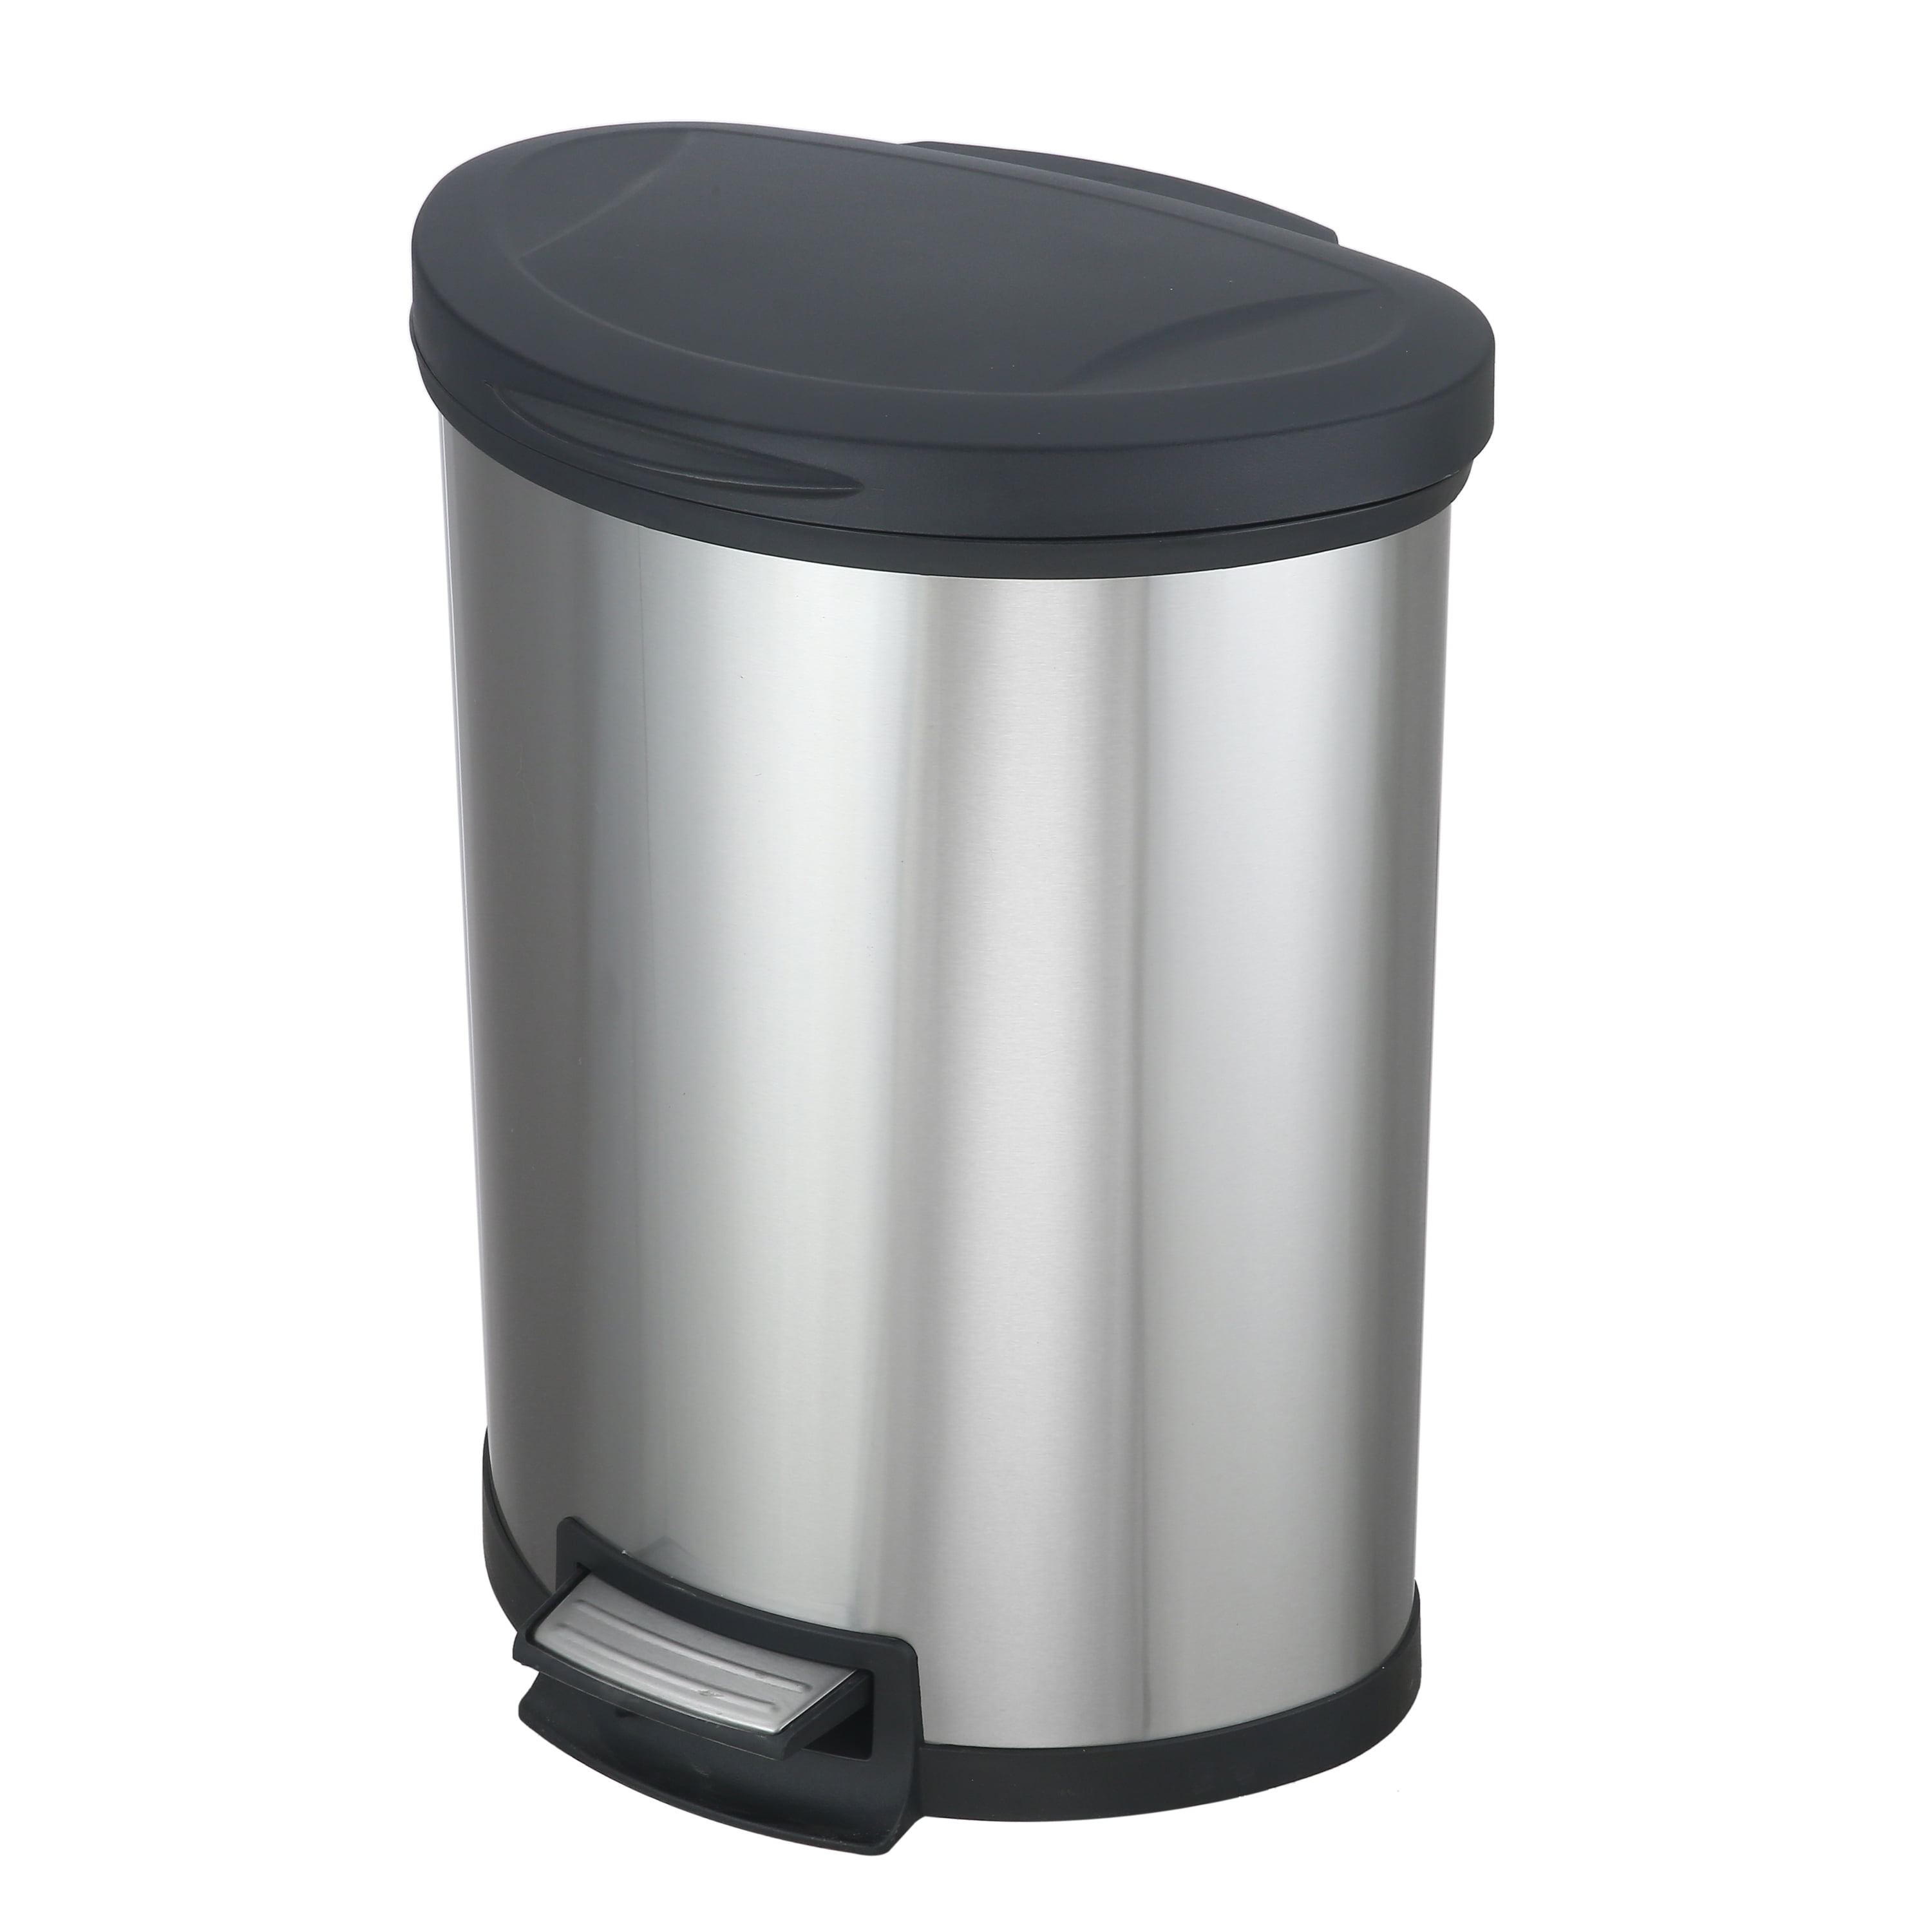 Mainstays 14.2 gal / 54L Semi Round Stainless Steel Kitchen Trash Can Garbage Cans Walmart Stainless Steel